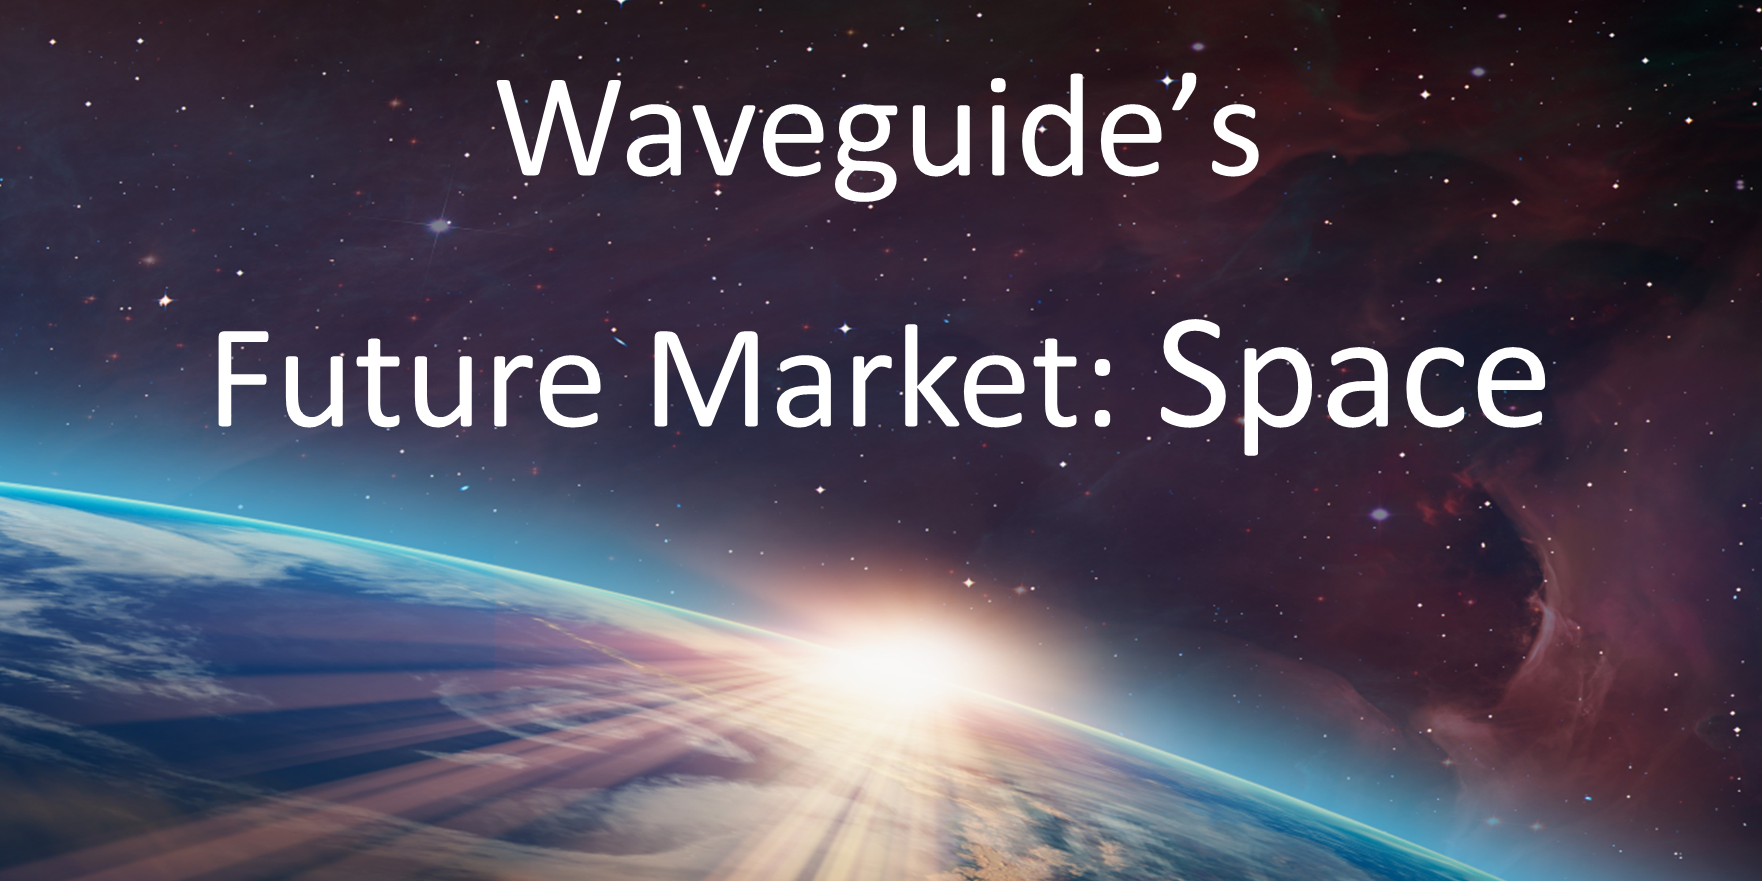 Flann's new blog, waveguide's future market - Space, discusses how Flann have been involved in waveguide solutions for SATCOM and Spaceflight applications.